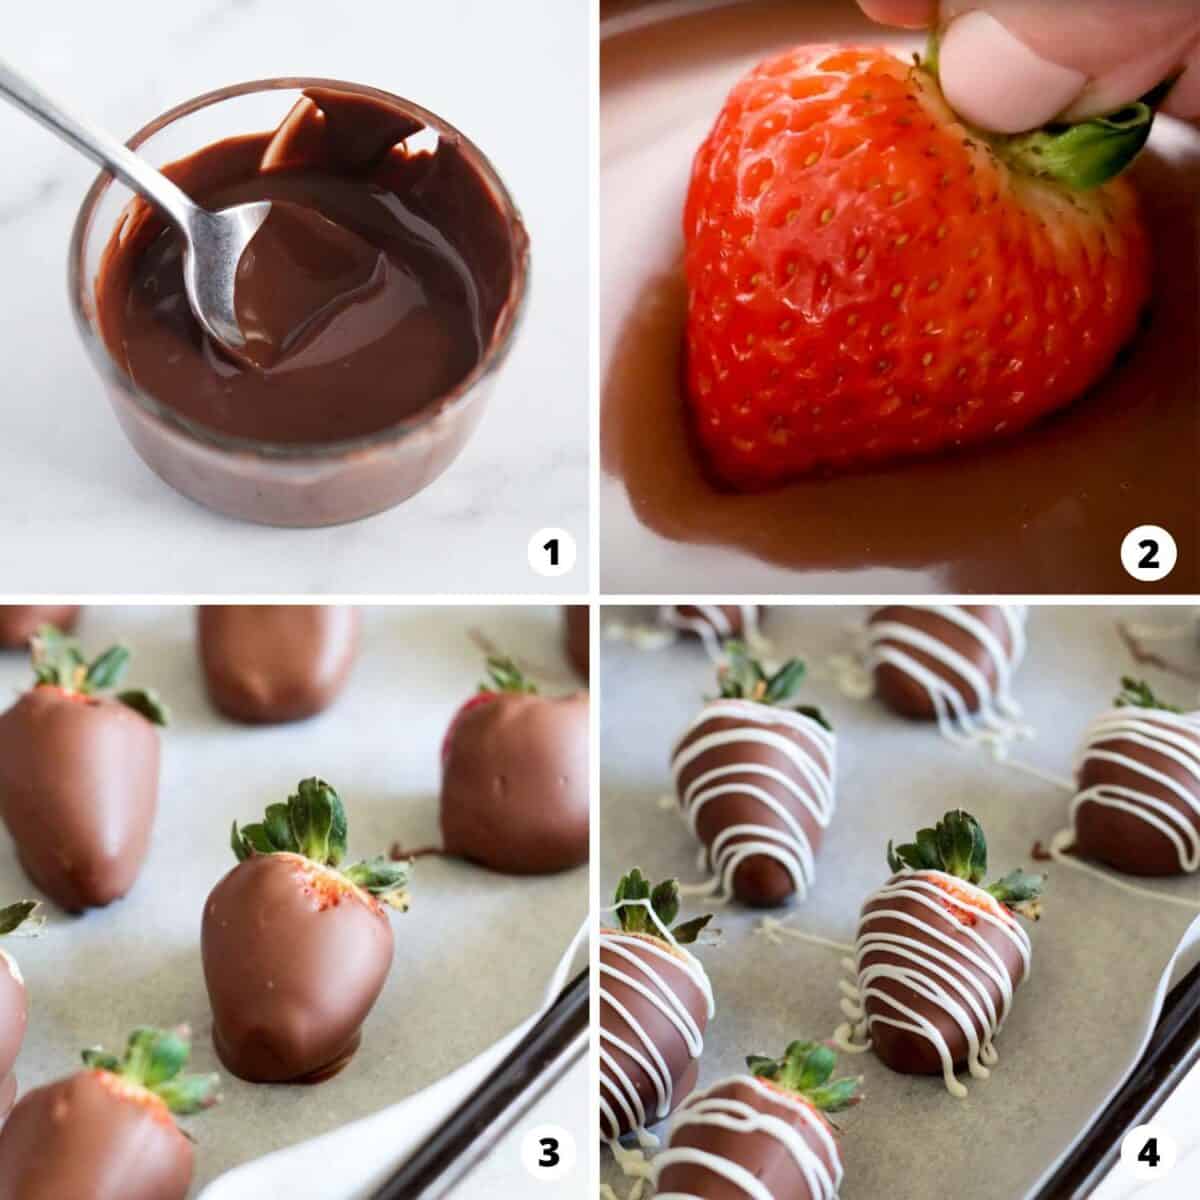 Showing how to make chocolate covered strawberries in a 4 step collage.